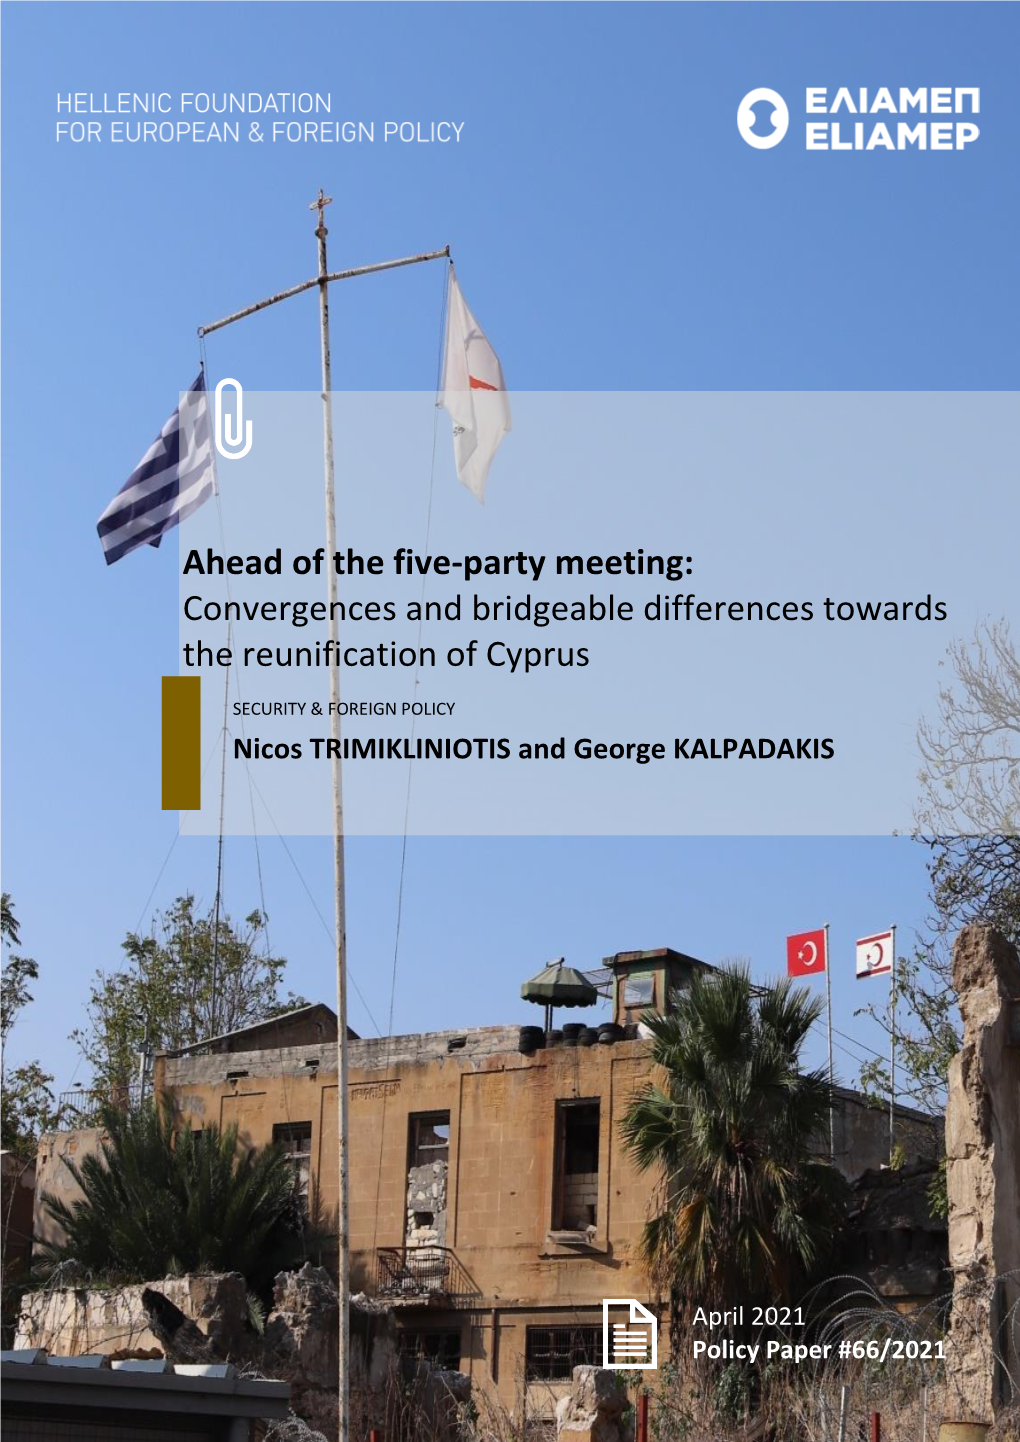 Ahead of the Five-Party Meeting: Convergences and Bridgeable Differences Towards the Reunification of Cyprus